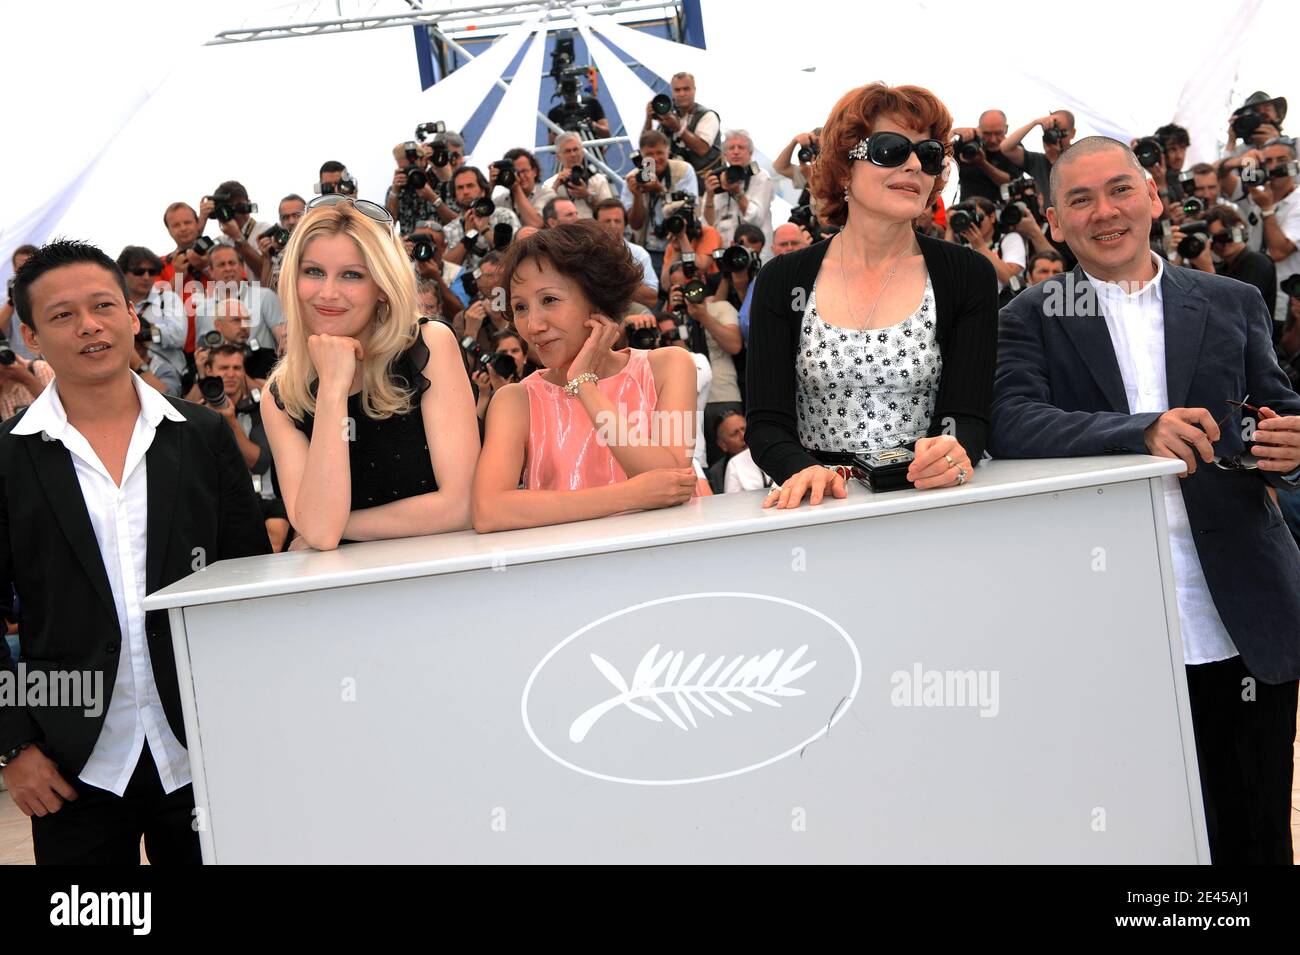 Director Tsai Ming-Liang with actresses Laetitia Casta, Yi-Ching Lu, Fanny Ardent and actor Kang-Sheng Lee attends the 'Face' Photocall held at the Palais Des Festival during the 62nd International Cannes Film Festival in Cannes, France on May 23, 2009. Photo by Nebinger-Orban/ABACAPRESS.COM Stock Photo